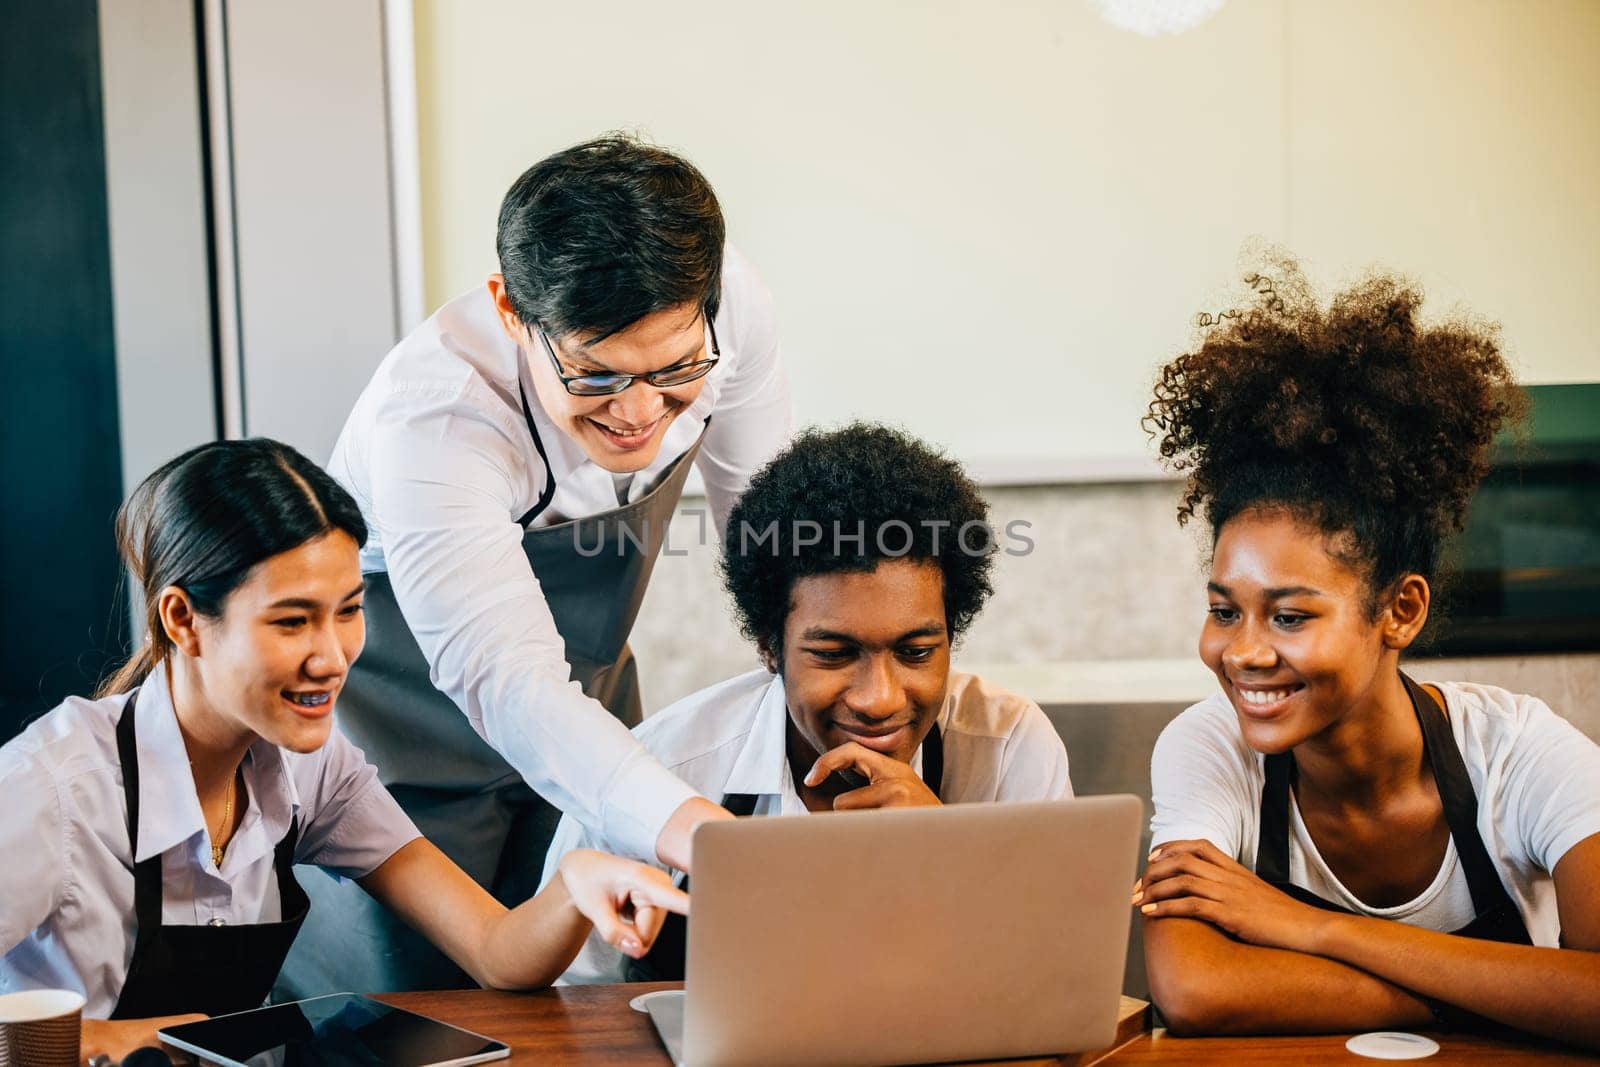 In the coffee shop business young entrepreneurs find joy fun pride. Planning managing with laptop brings satisfaction. Baristas owners collaborate for success teamwork.